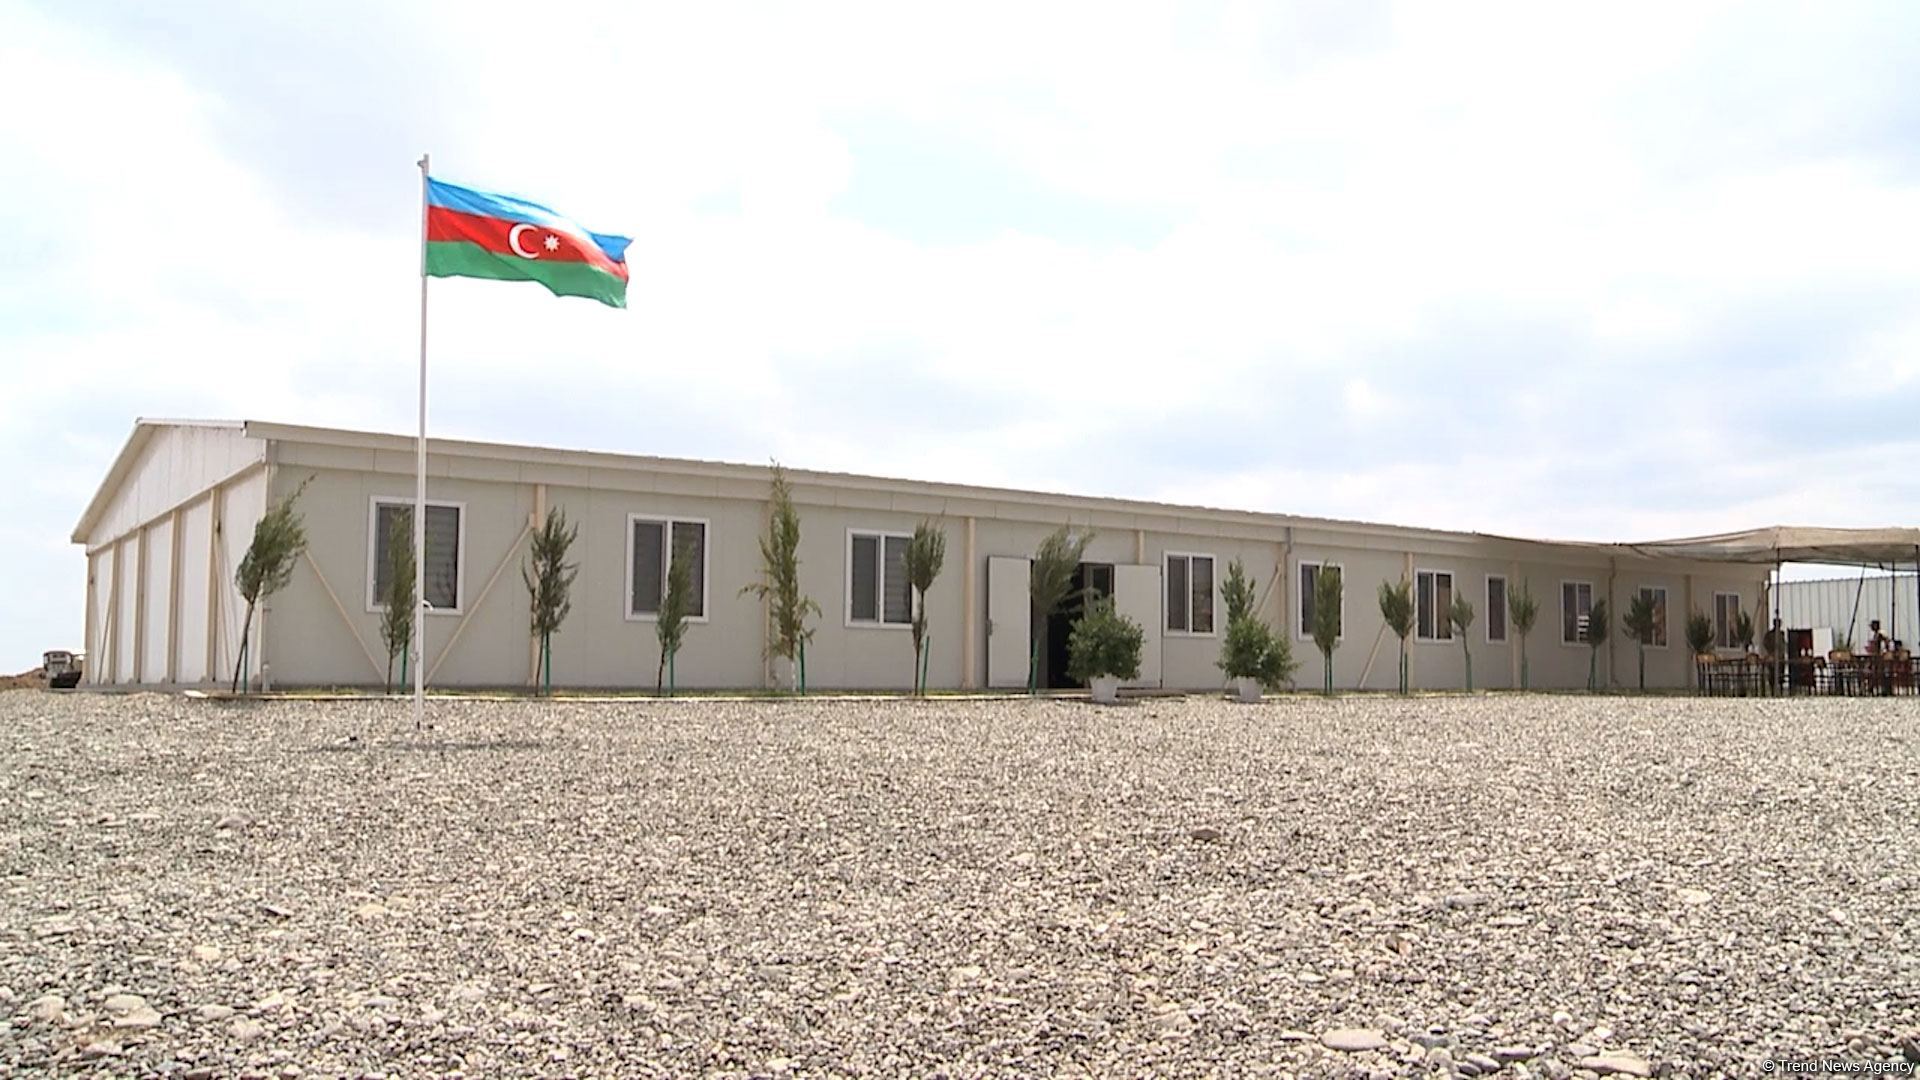 Azerbaijani army consolidating in liberated lands - Trend TV (VIDEO)